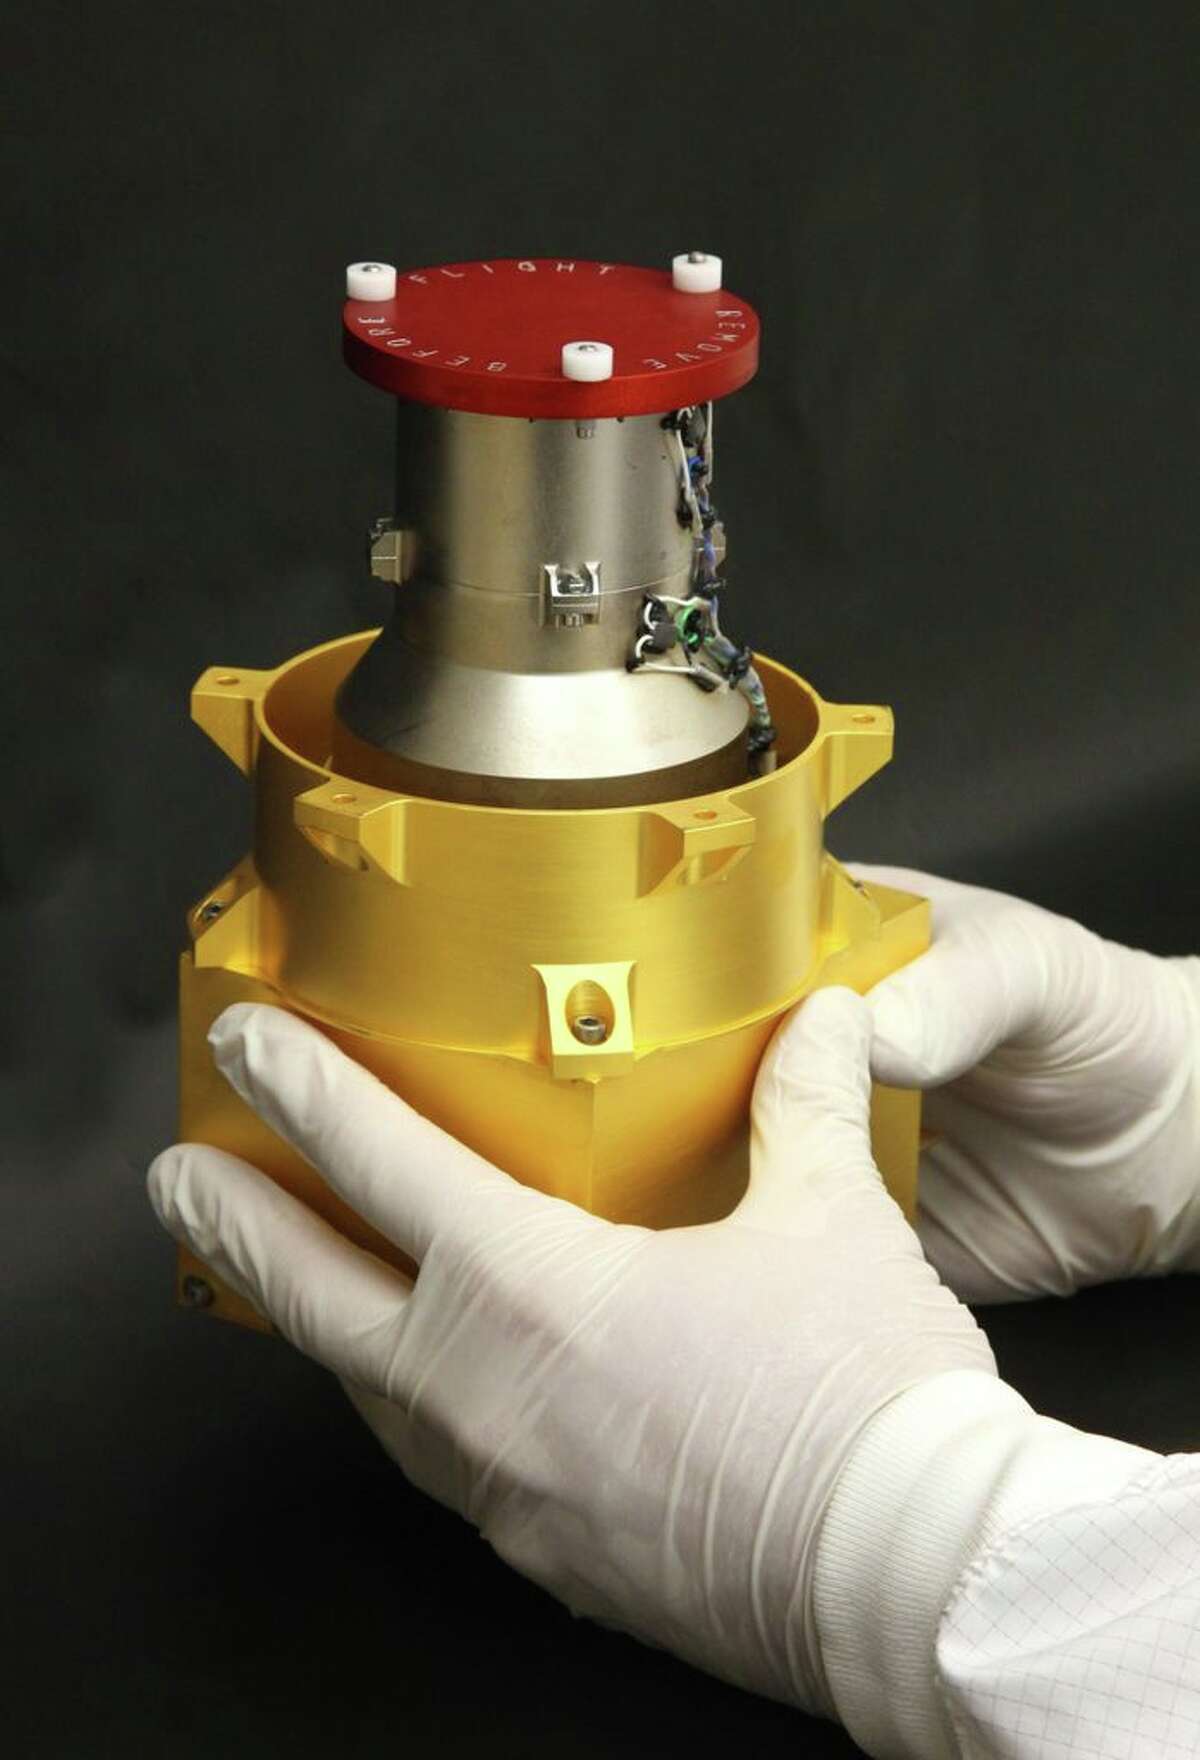 San Antonio-based Southwest Research Institute designed and built the Radiation Assessment Detector, or RAD, a sophisticated, three-pound instrument that will help determine how hazardous conditions are to life on Mars. It's one of 10 instruments onboard the Curiosity rover.